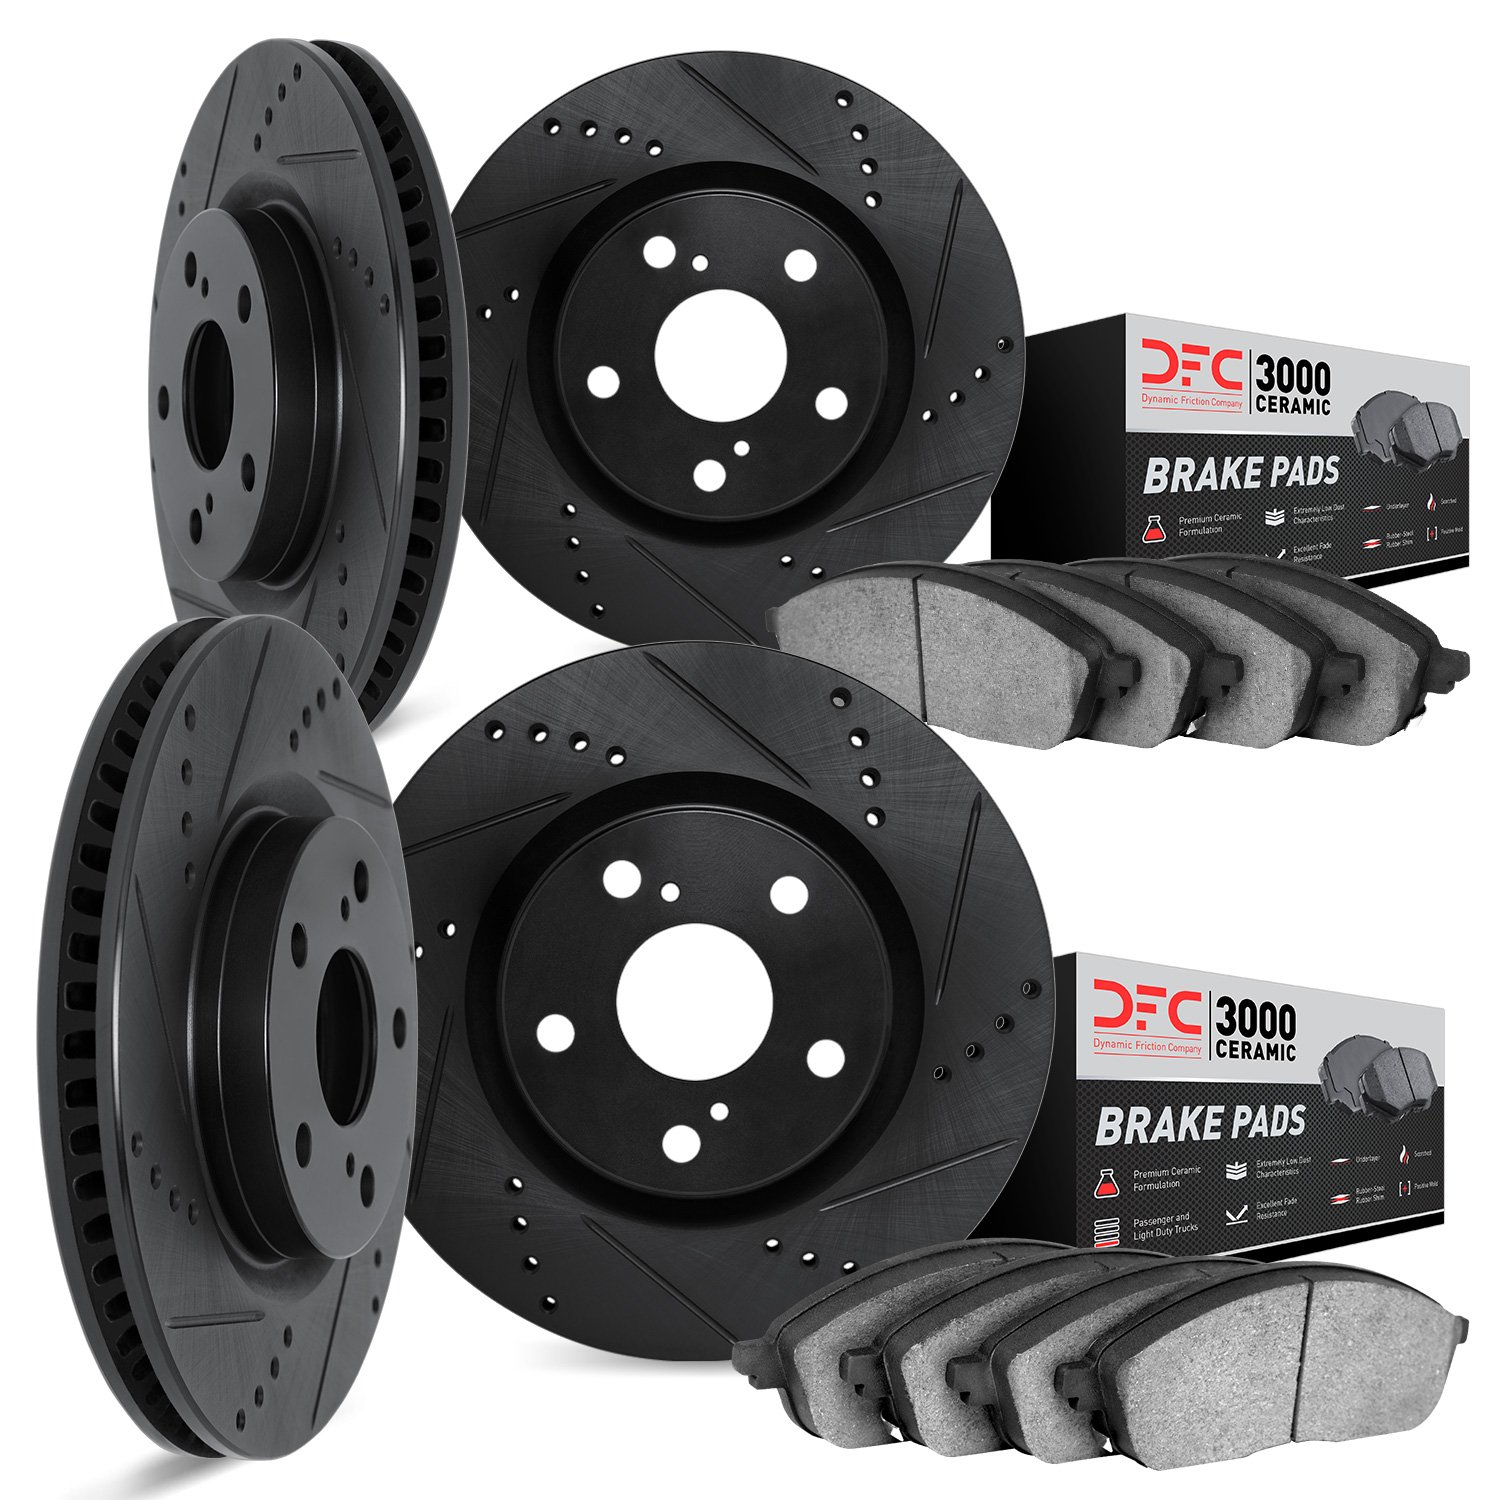 8304-13042 Drilled/Slotted Brake Rotors with 3000-Series Ceramic Brake Pads Kit [Black], 2016-2019 Subaru, Position: Front and R